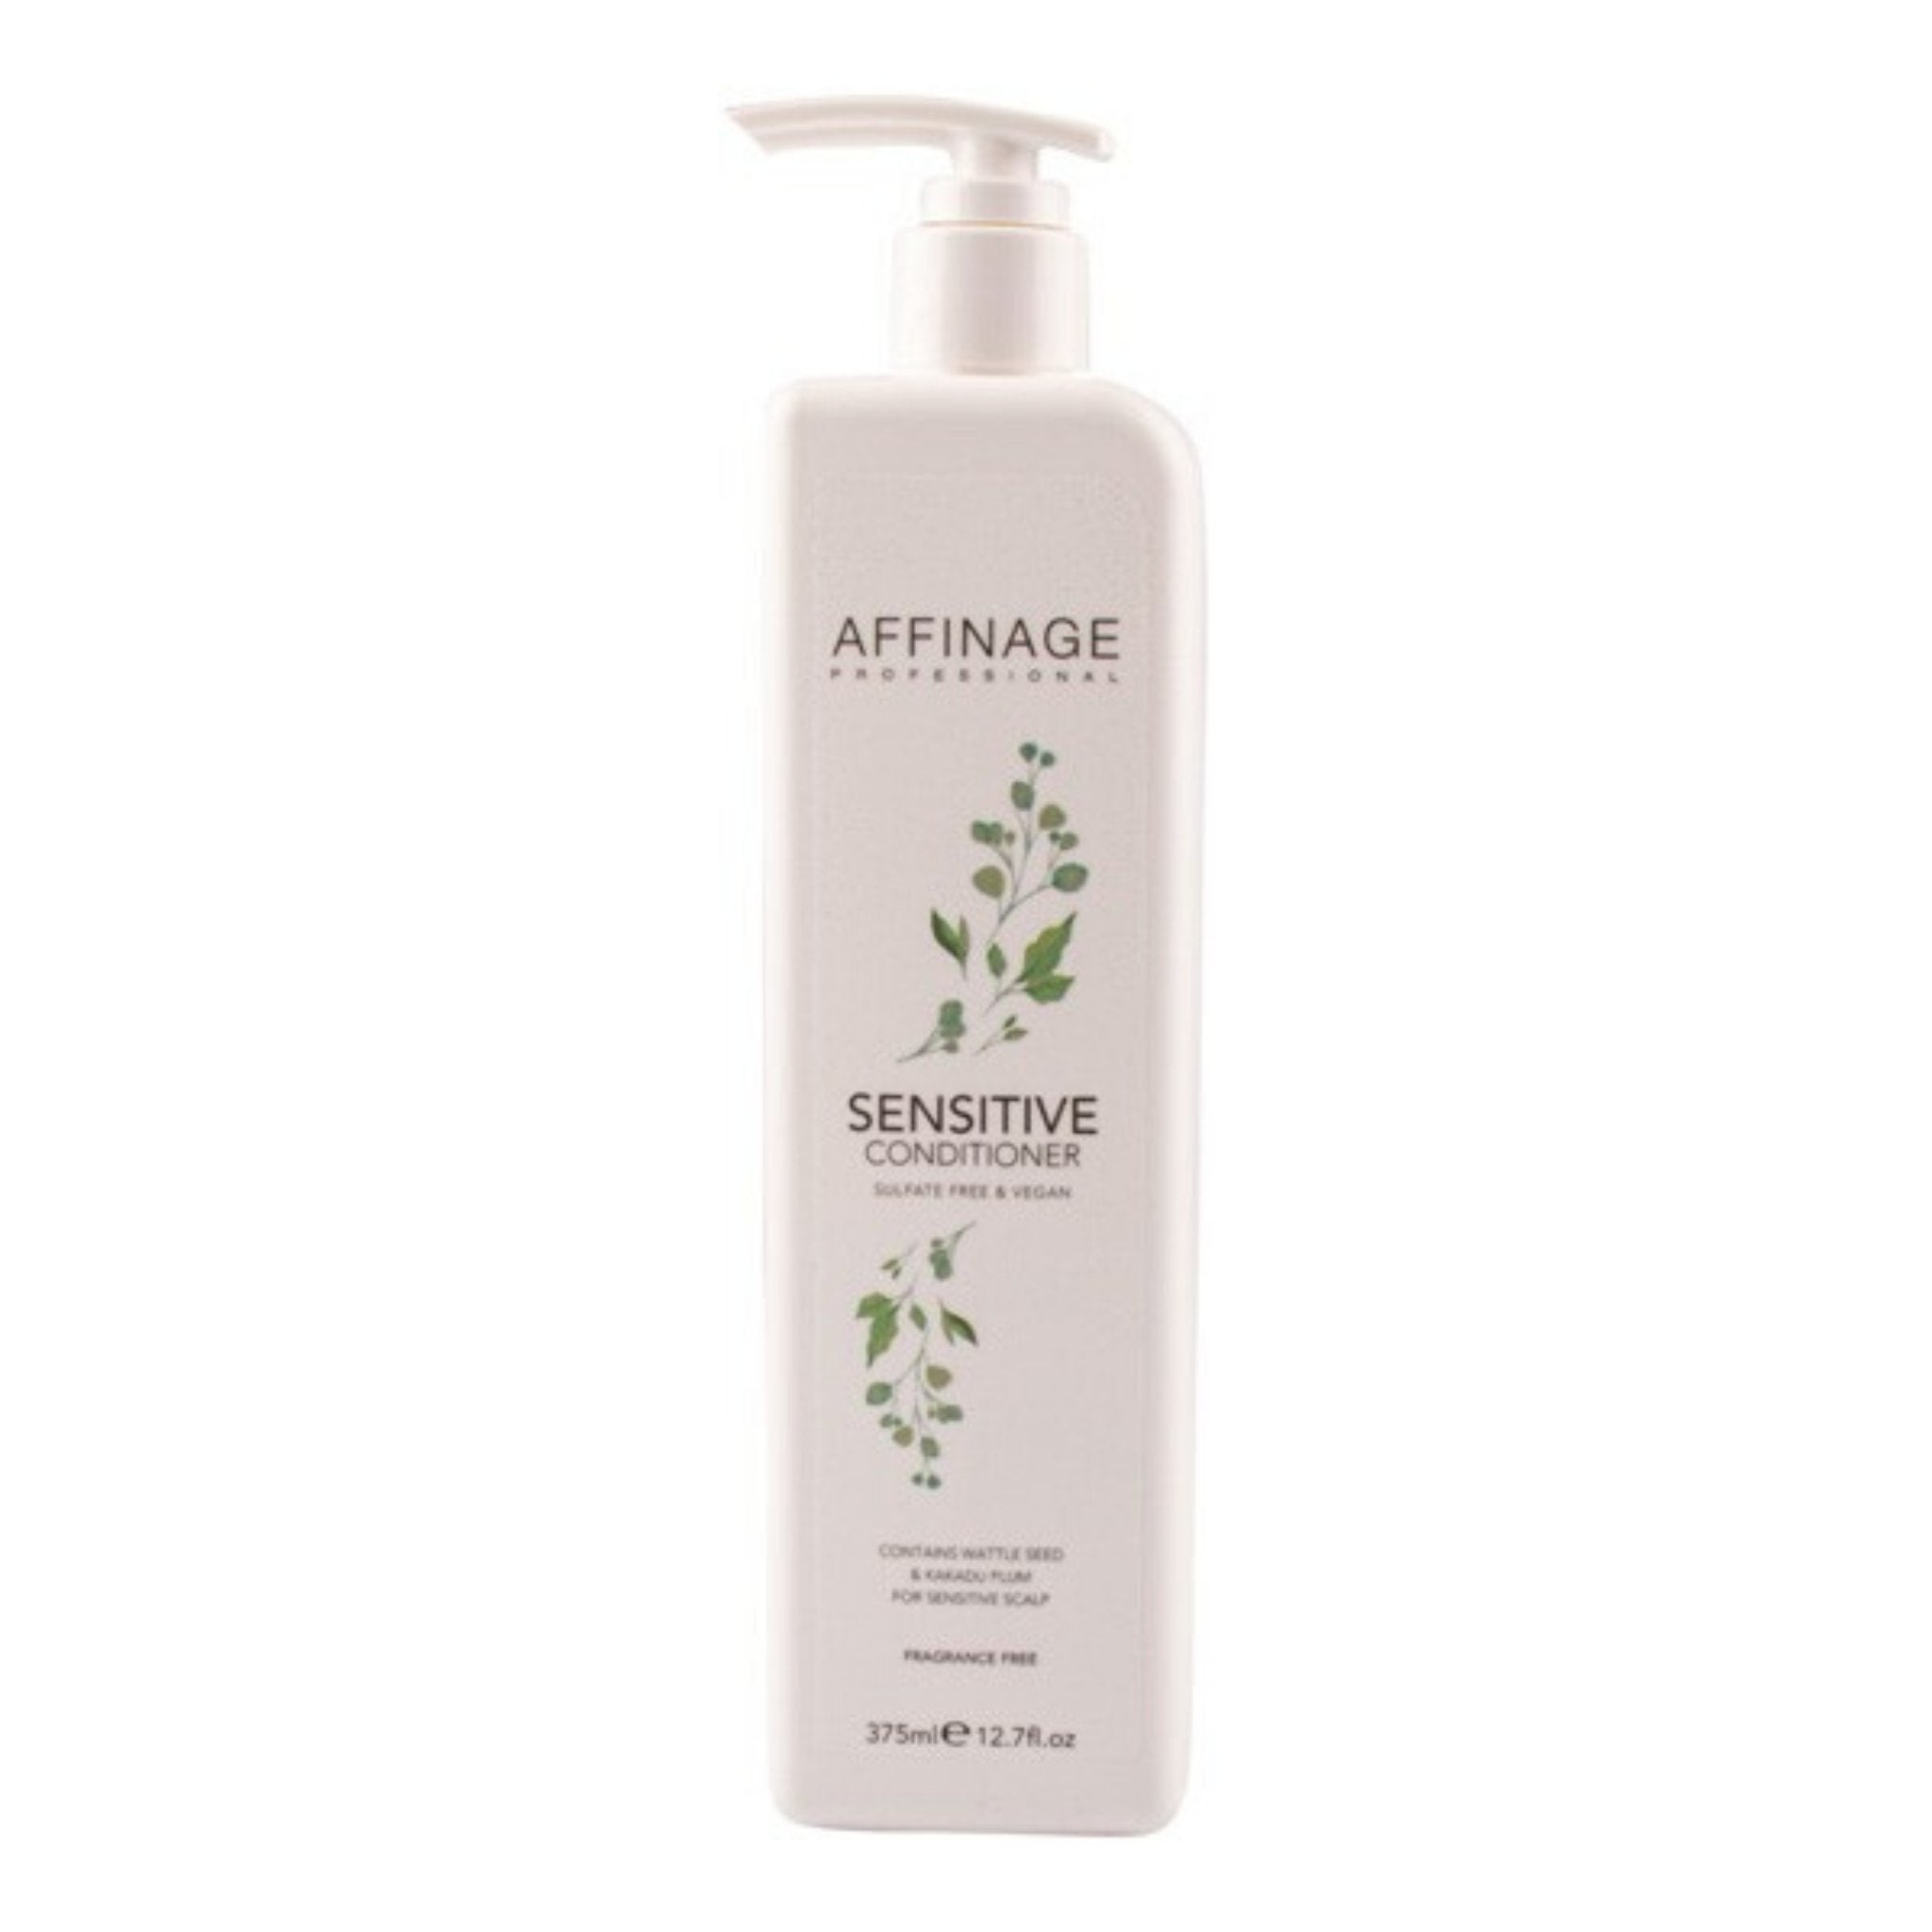 Affinage Cleanse & Care Sensitive Conditioner - HairBeautyInk